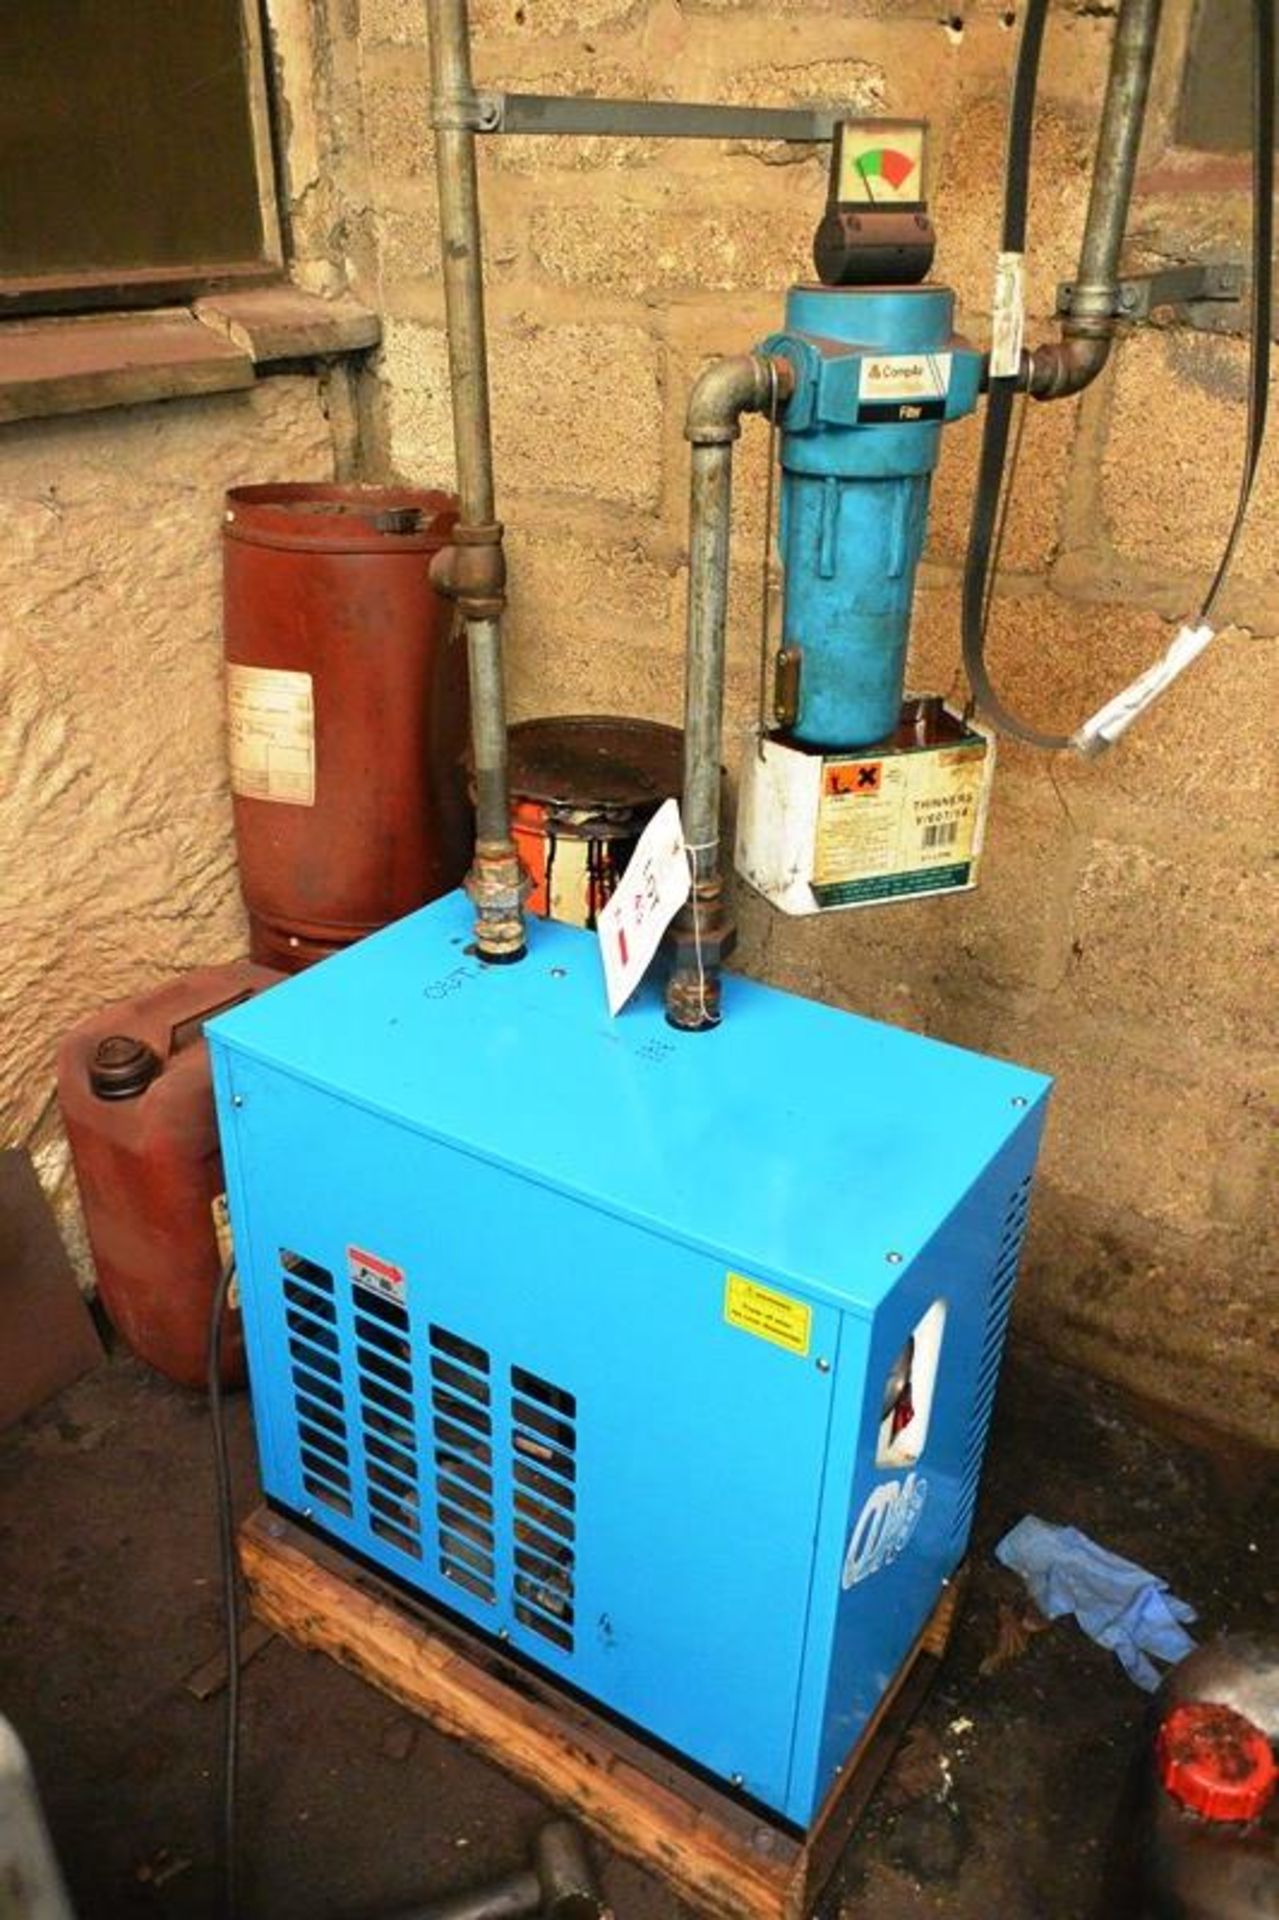 Hi-Line compressed air dryer, mmodel CDA-70, serial no. 110250085 (2011), with inline Compair